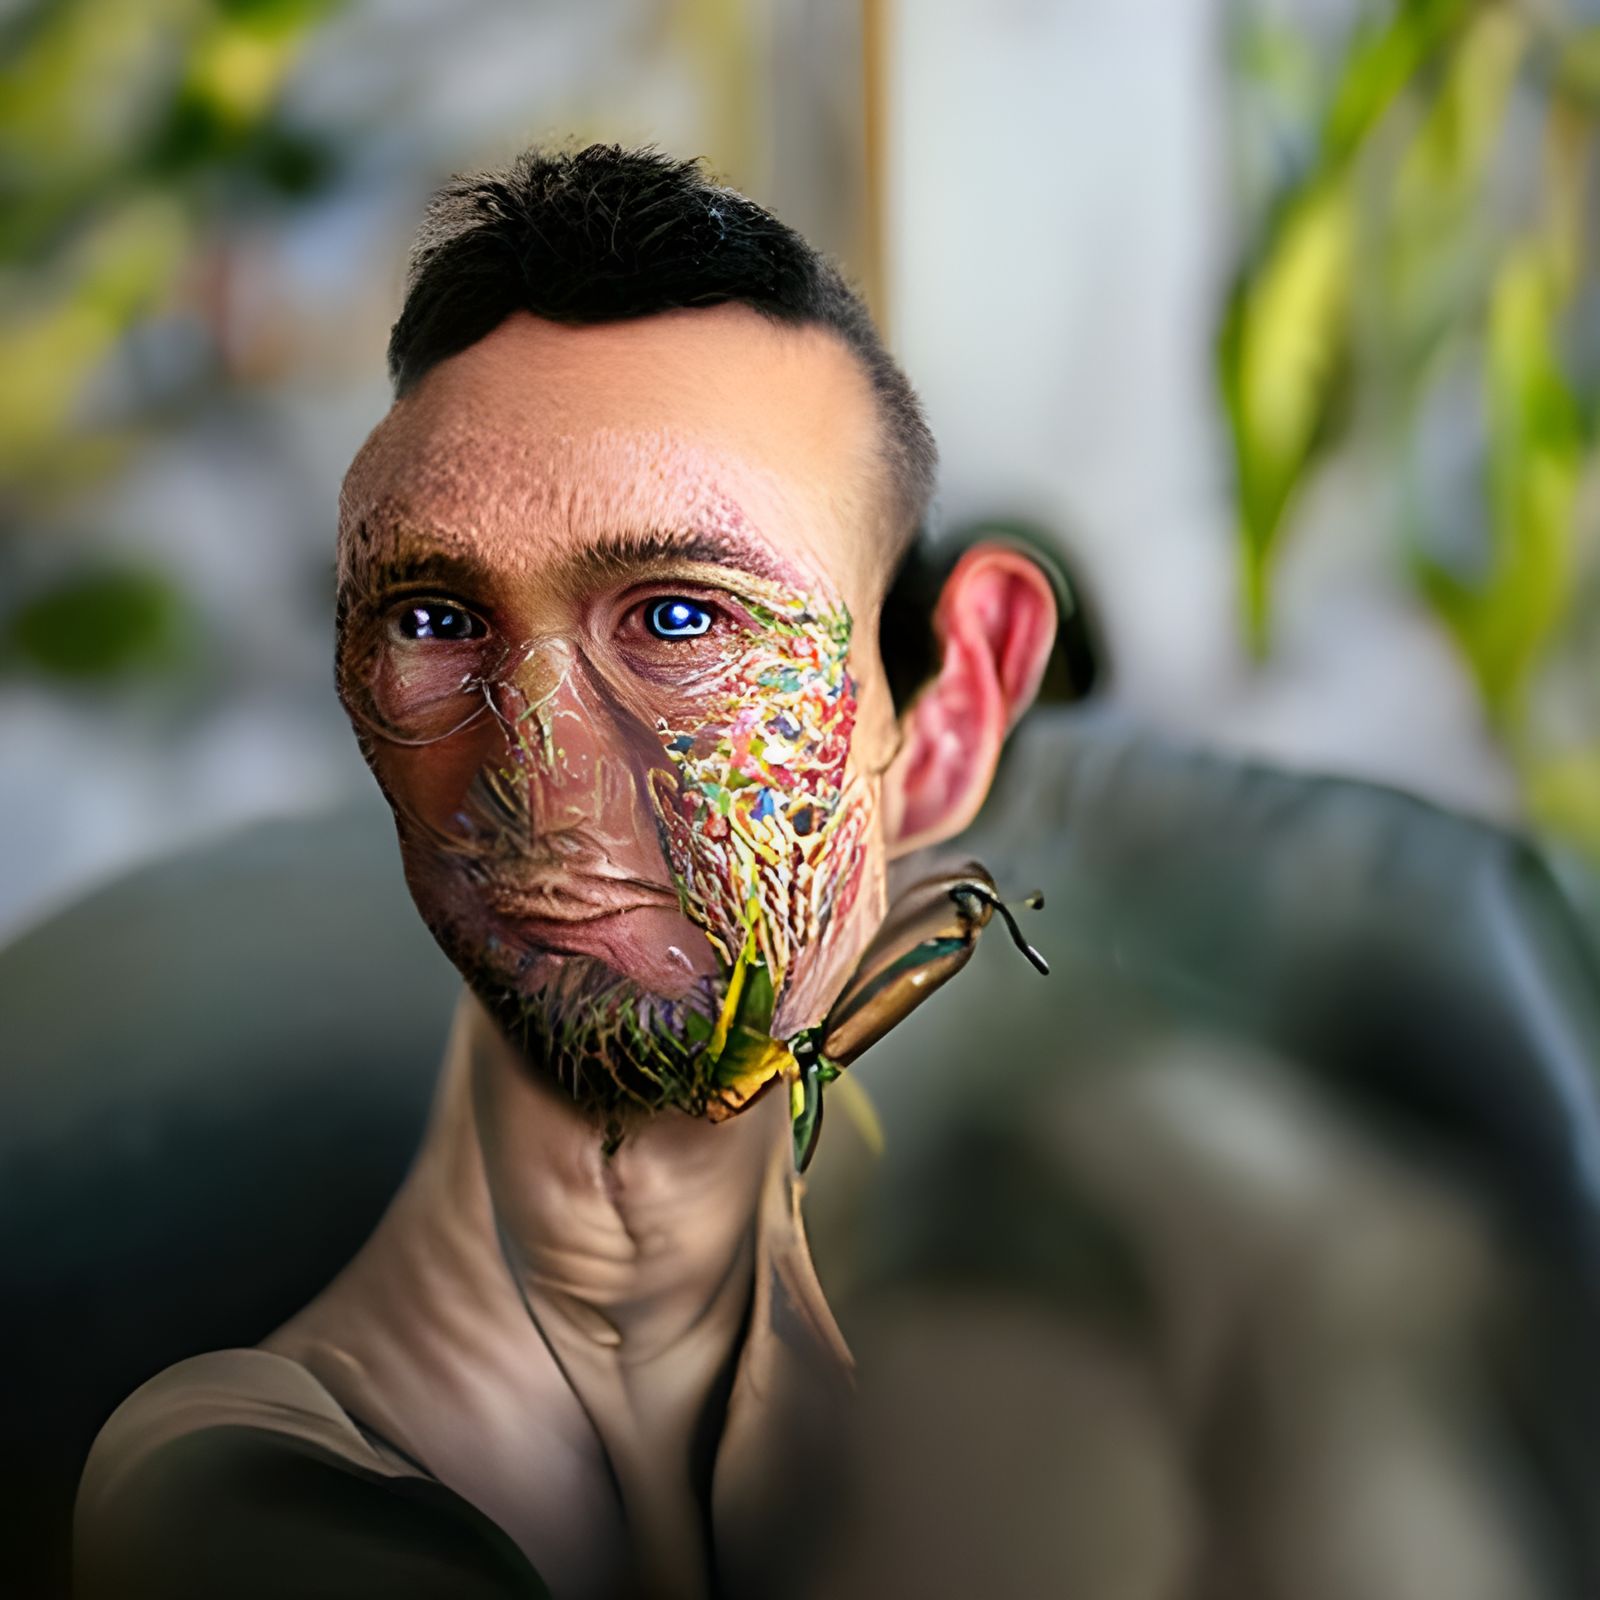 human insect hybrid